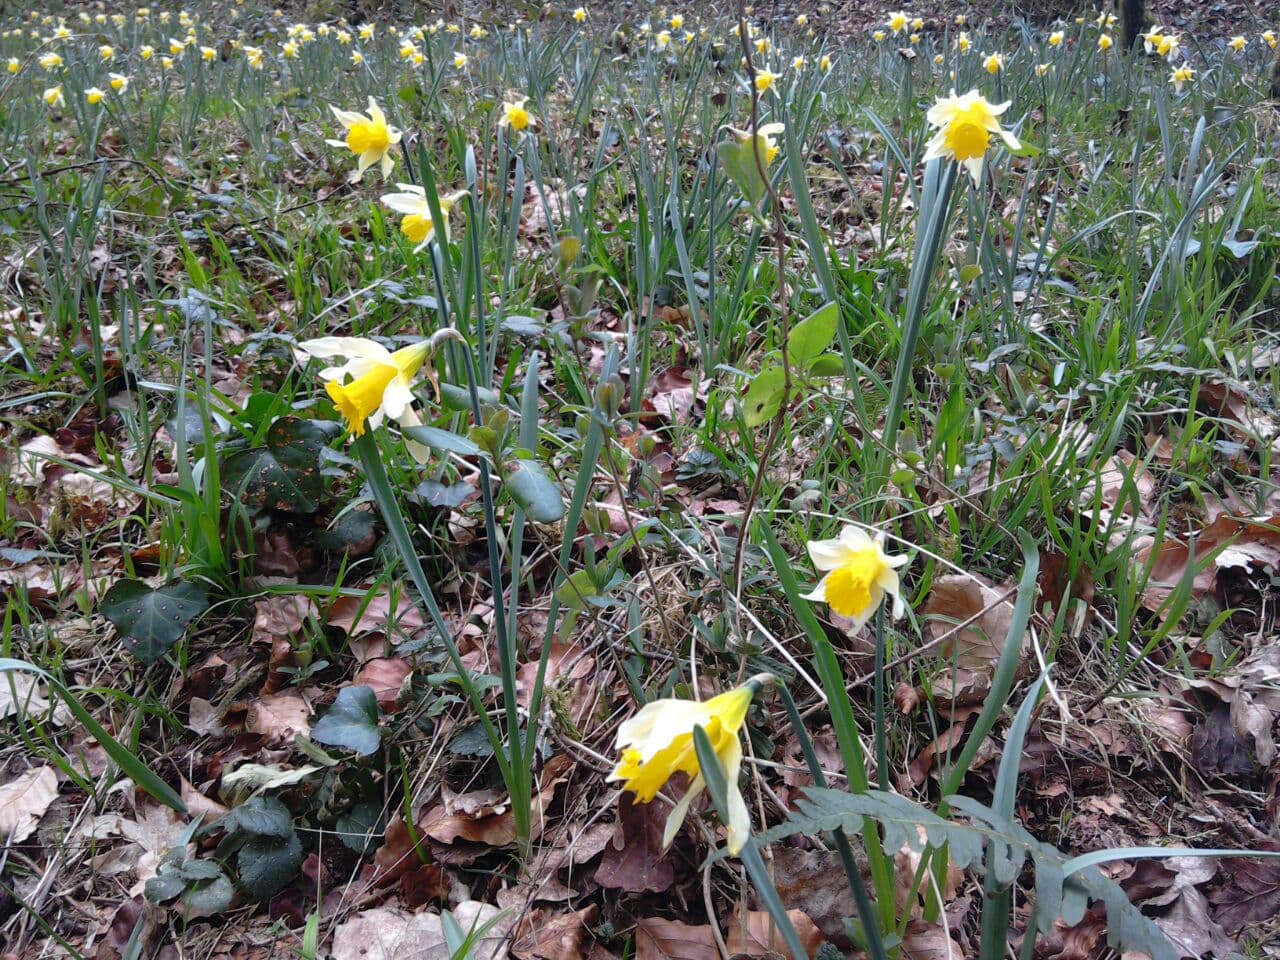 Wild daffodils in the Cresme Valley, Calvados, Normandy